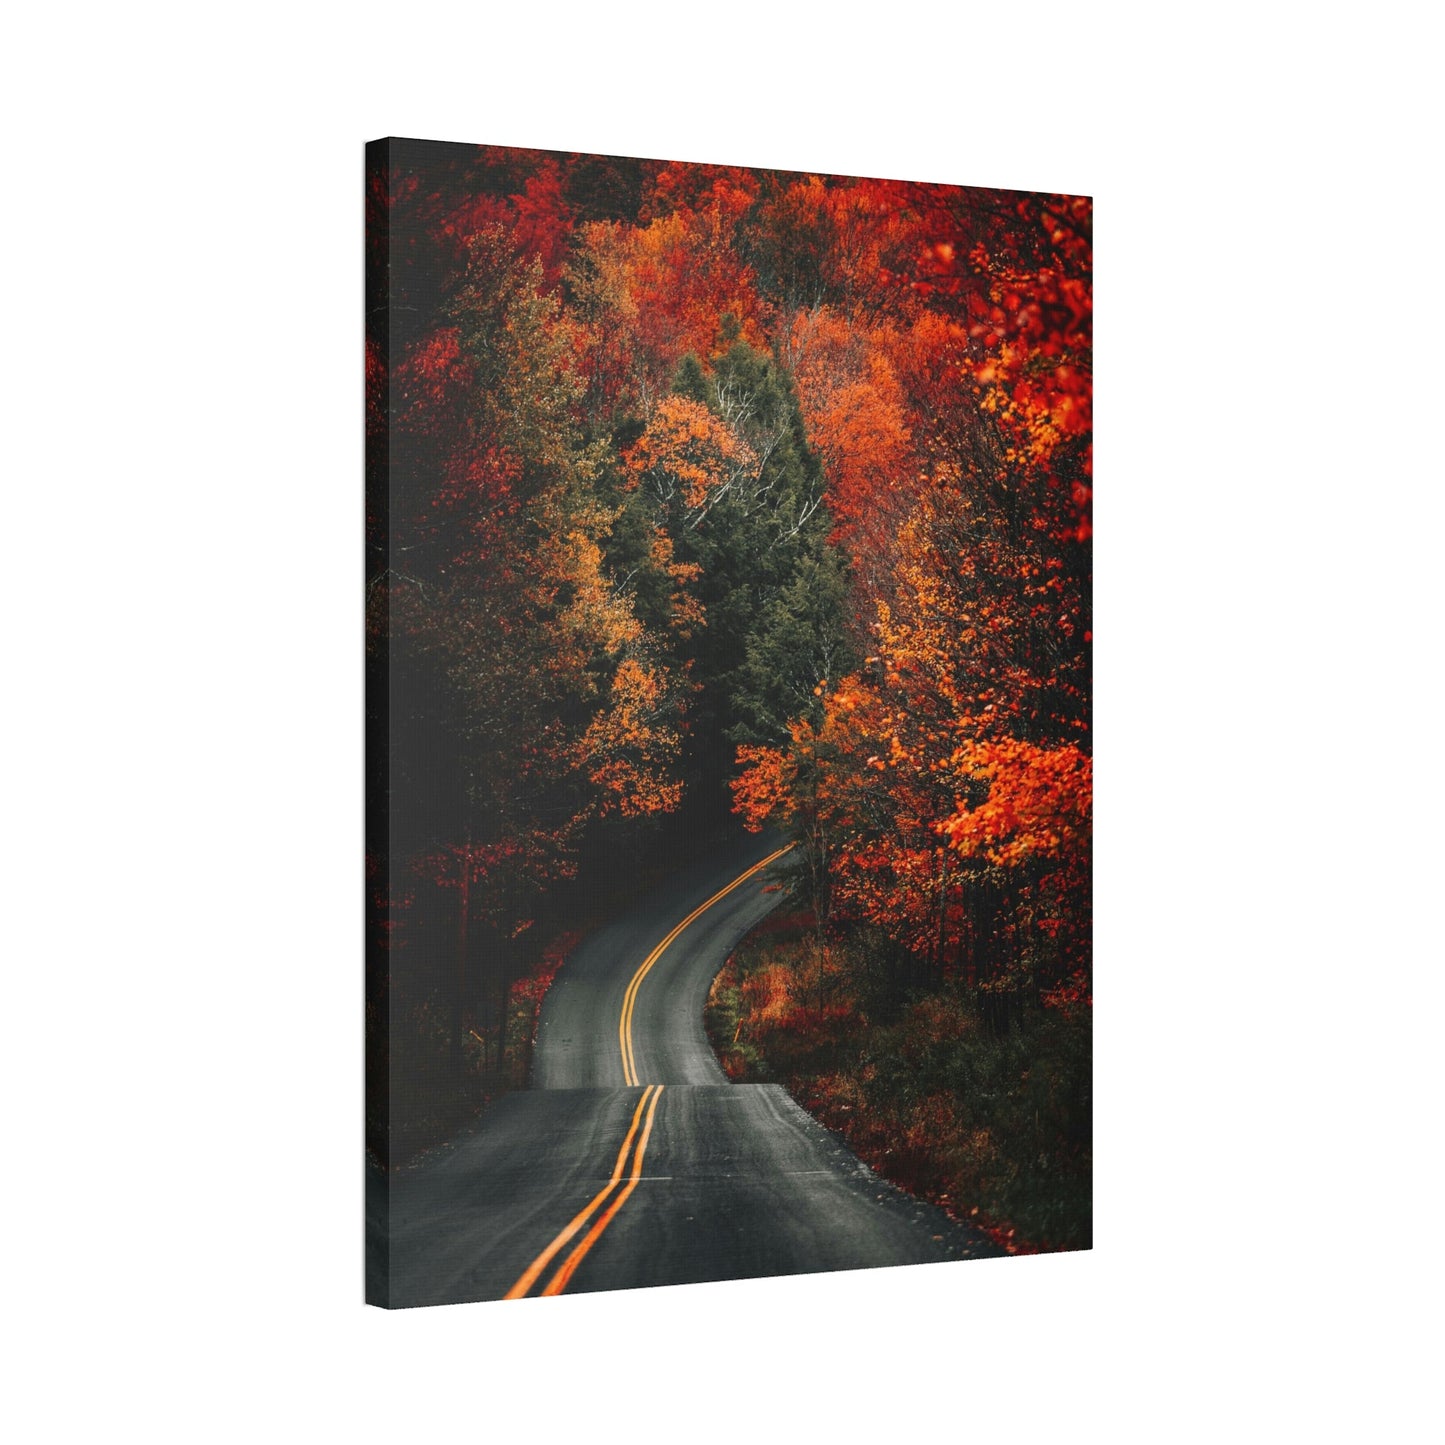 Golden Hues of Autumn: A Stunning Framed Poster and Wall Art to Bring Nature Indoors